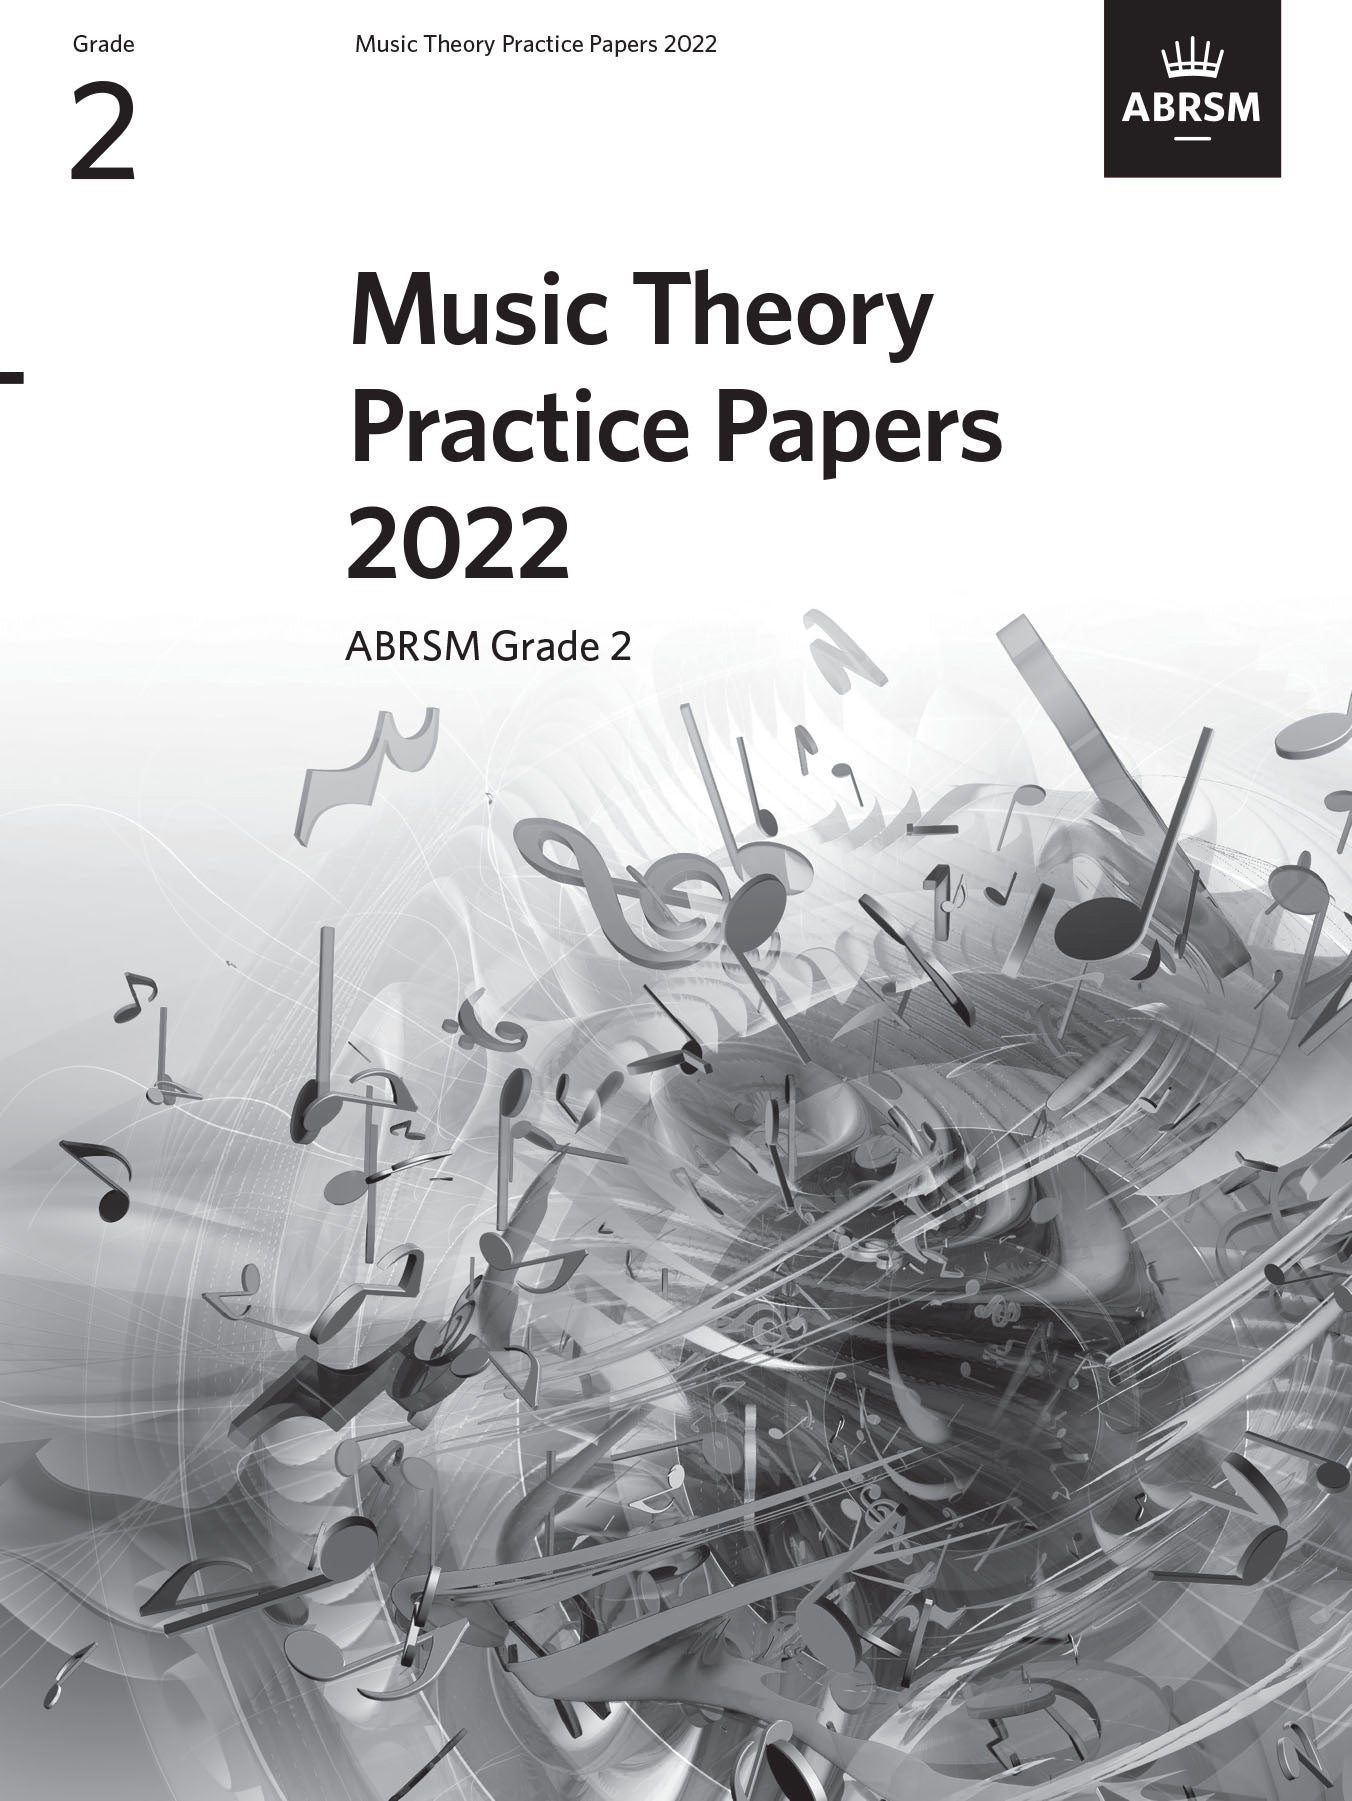 ABRSM Music Theory Practice Papers 2022 Grade 2